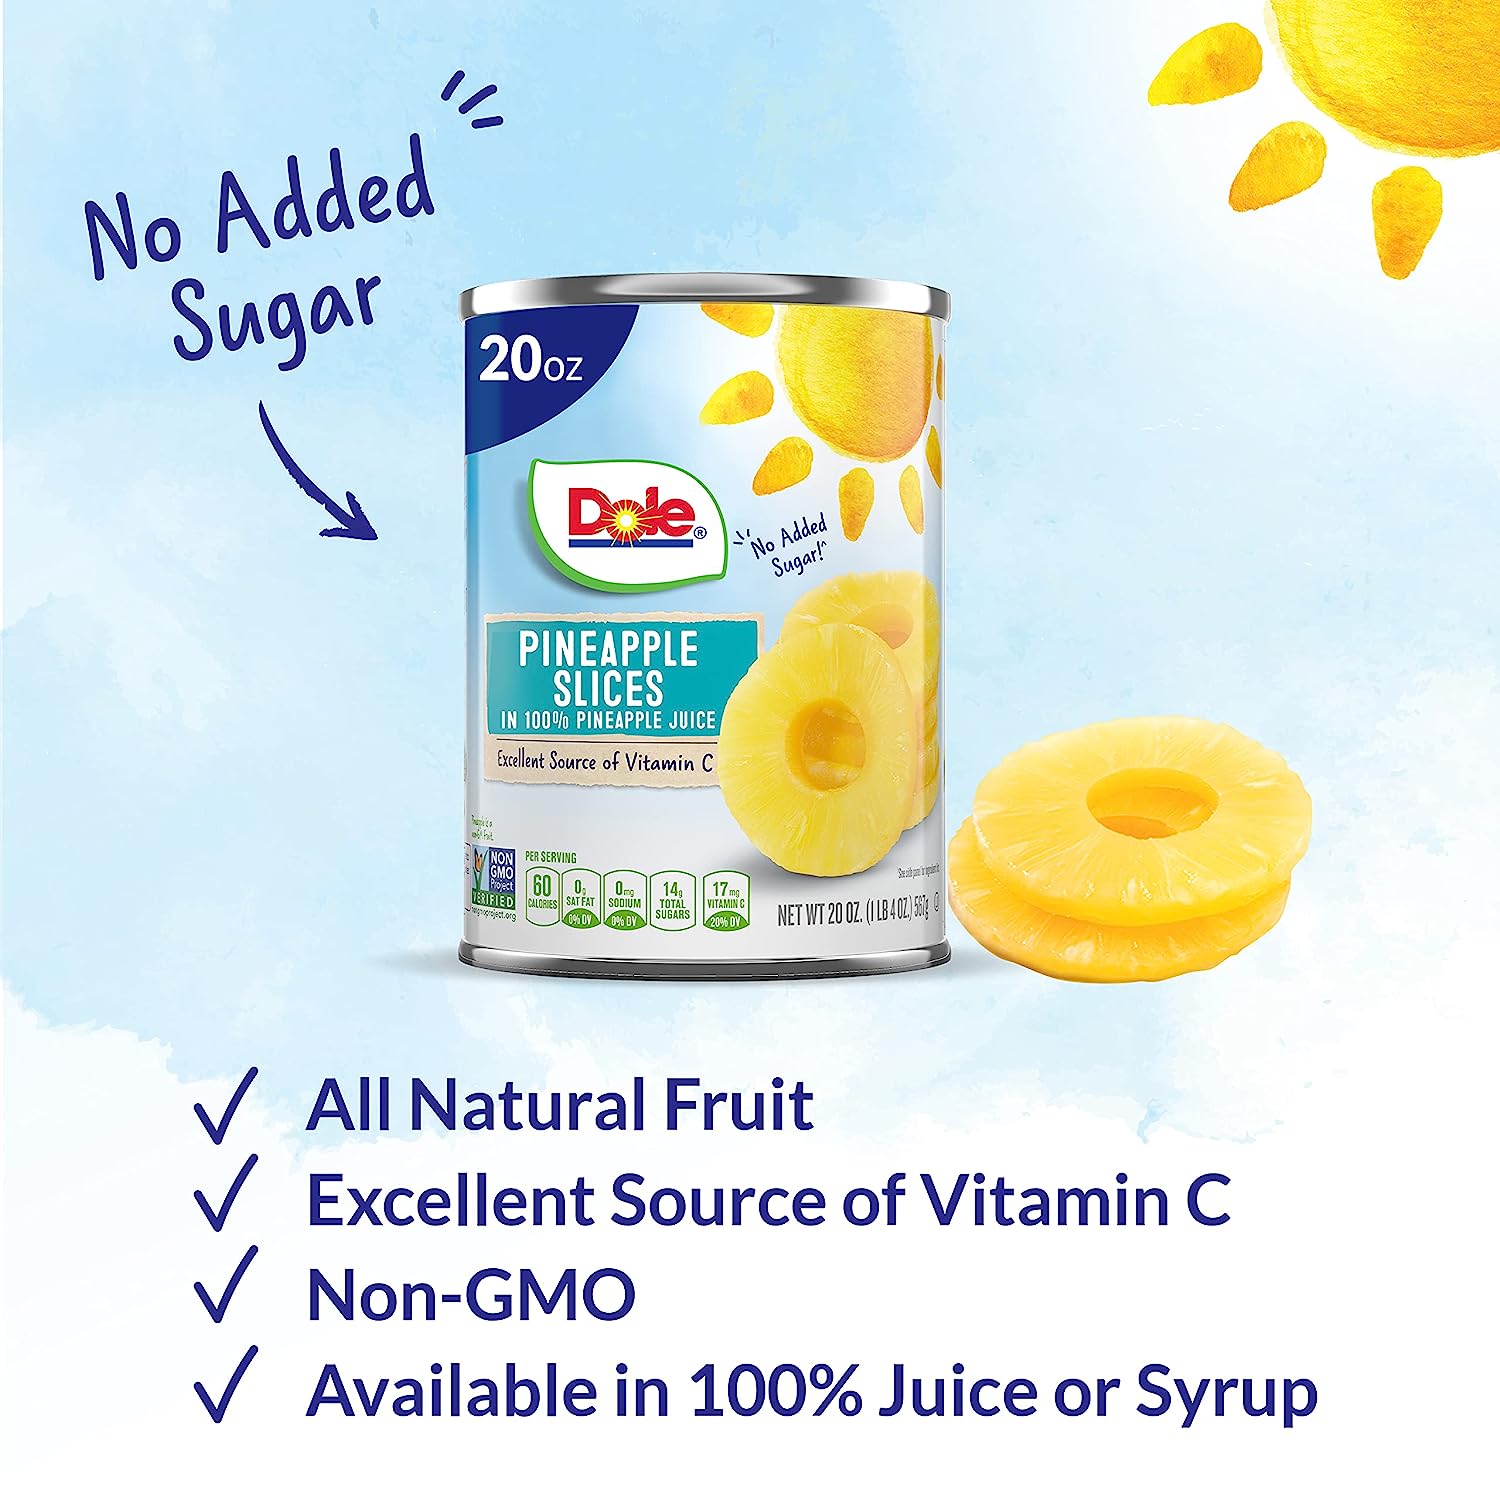 Dole Canned Fruit, Pineapple Slices in 100% Pineapple Juice*, Gluten Free, Pantry Staples, 20 Oz, 12 Count